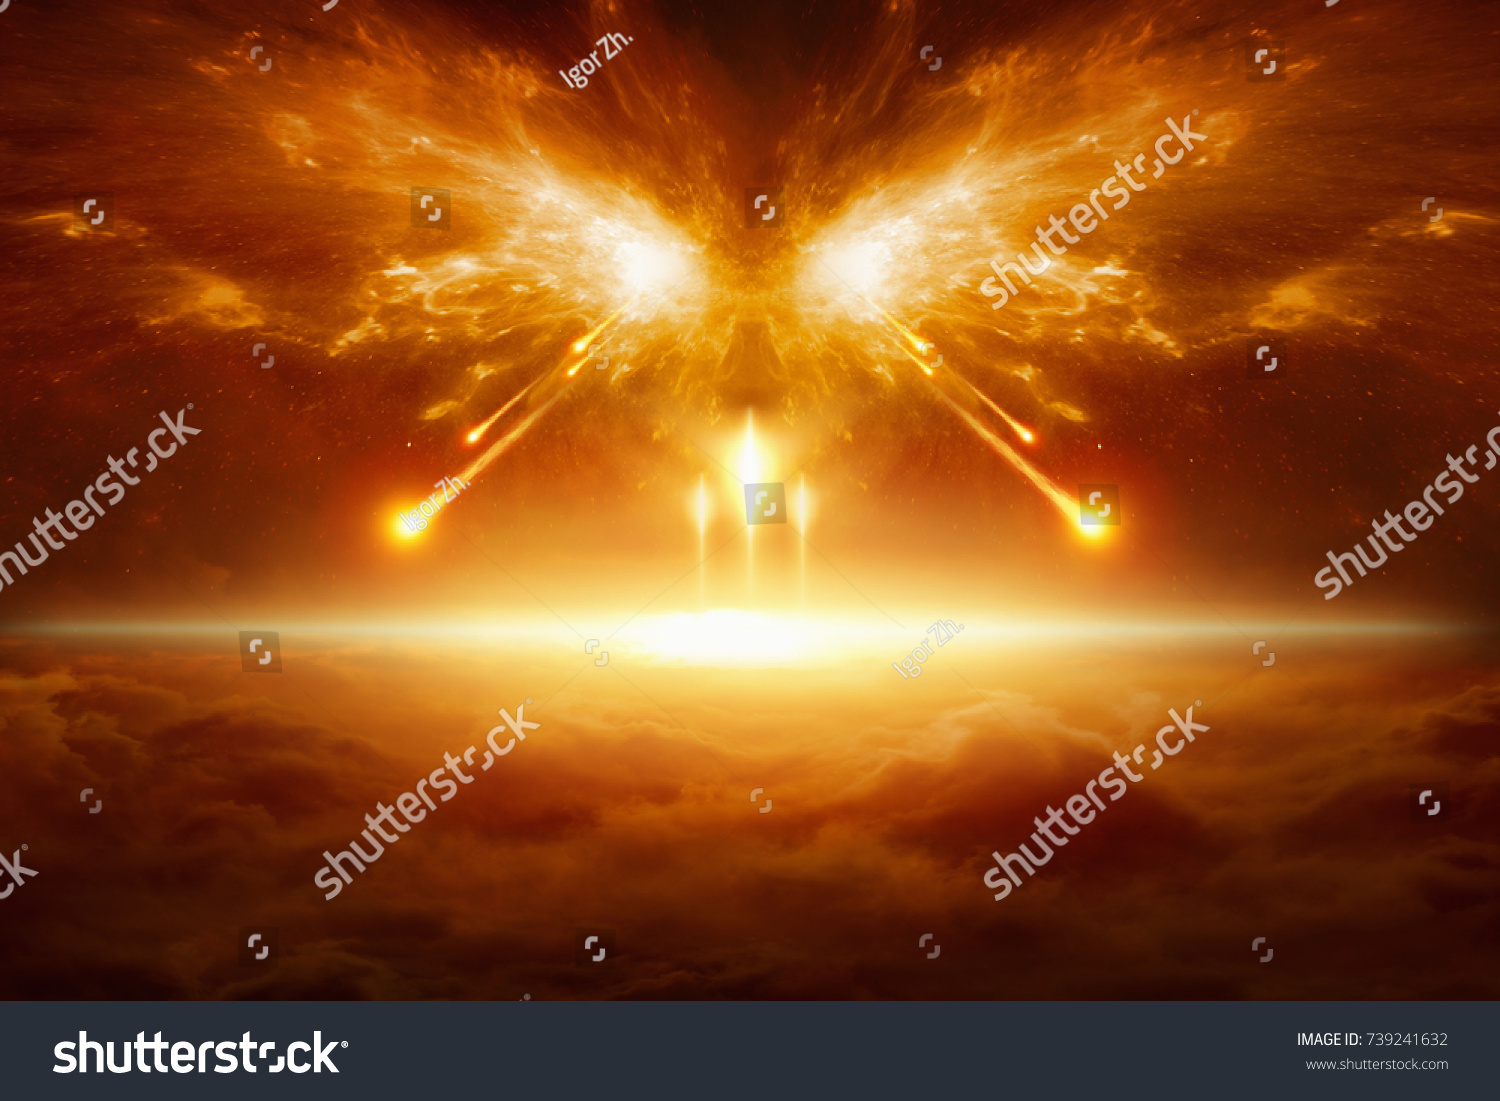 Apocalyptic religious background - end of the world, battle of armageddon, forces of evil destroy humanity. Elements of this image furnished by NASA #739241632